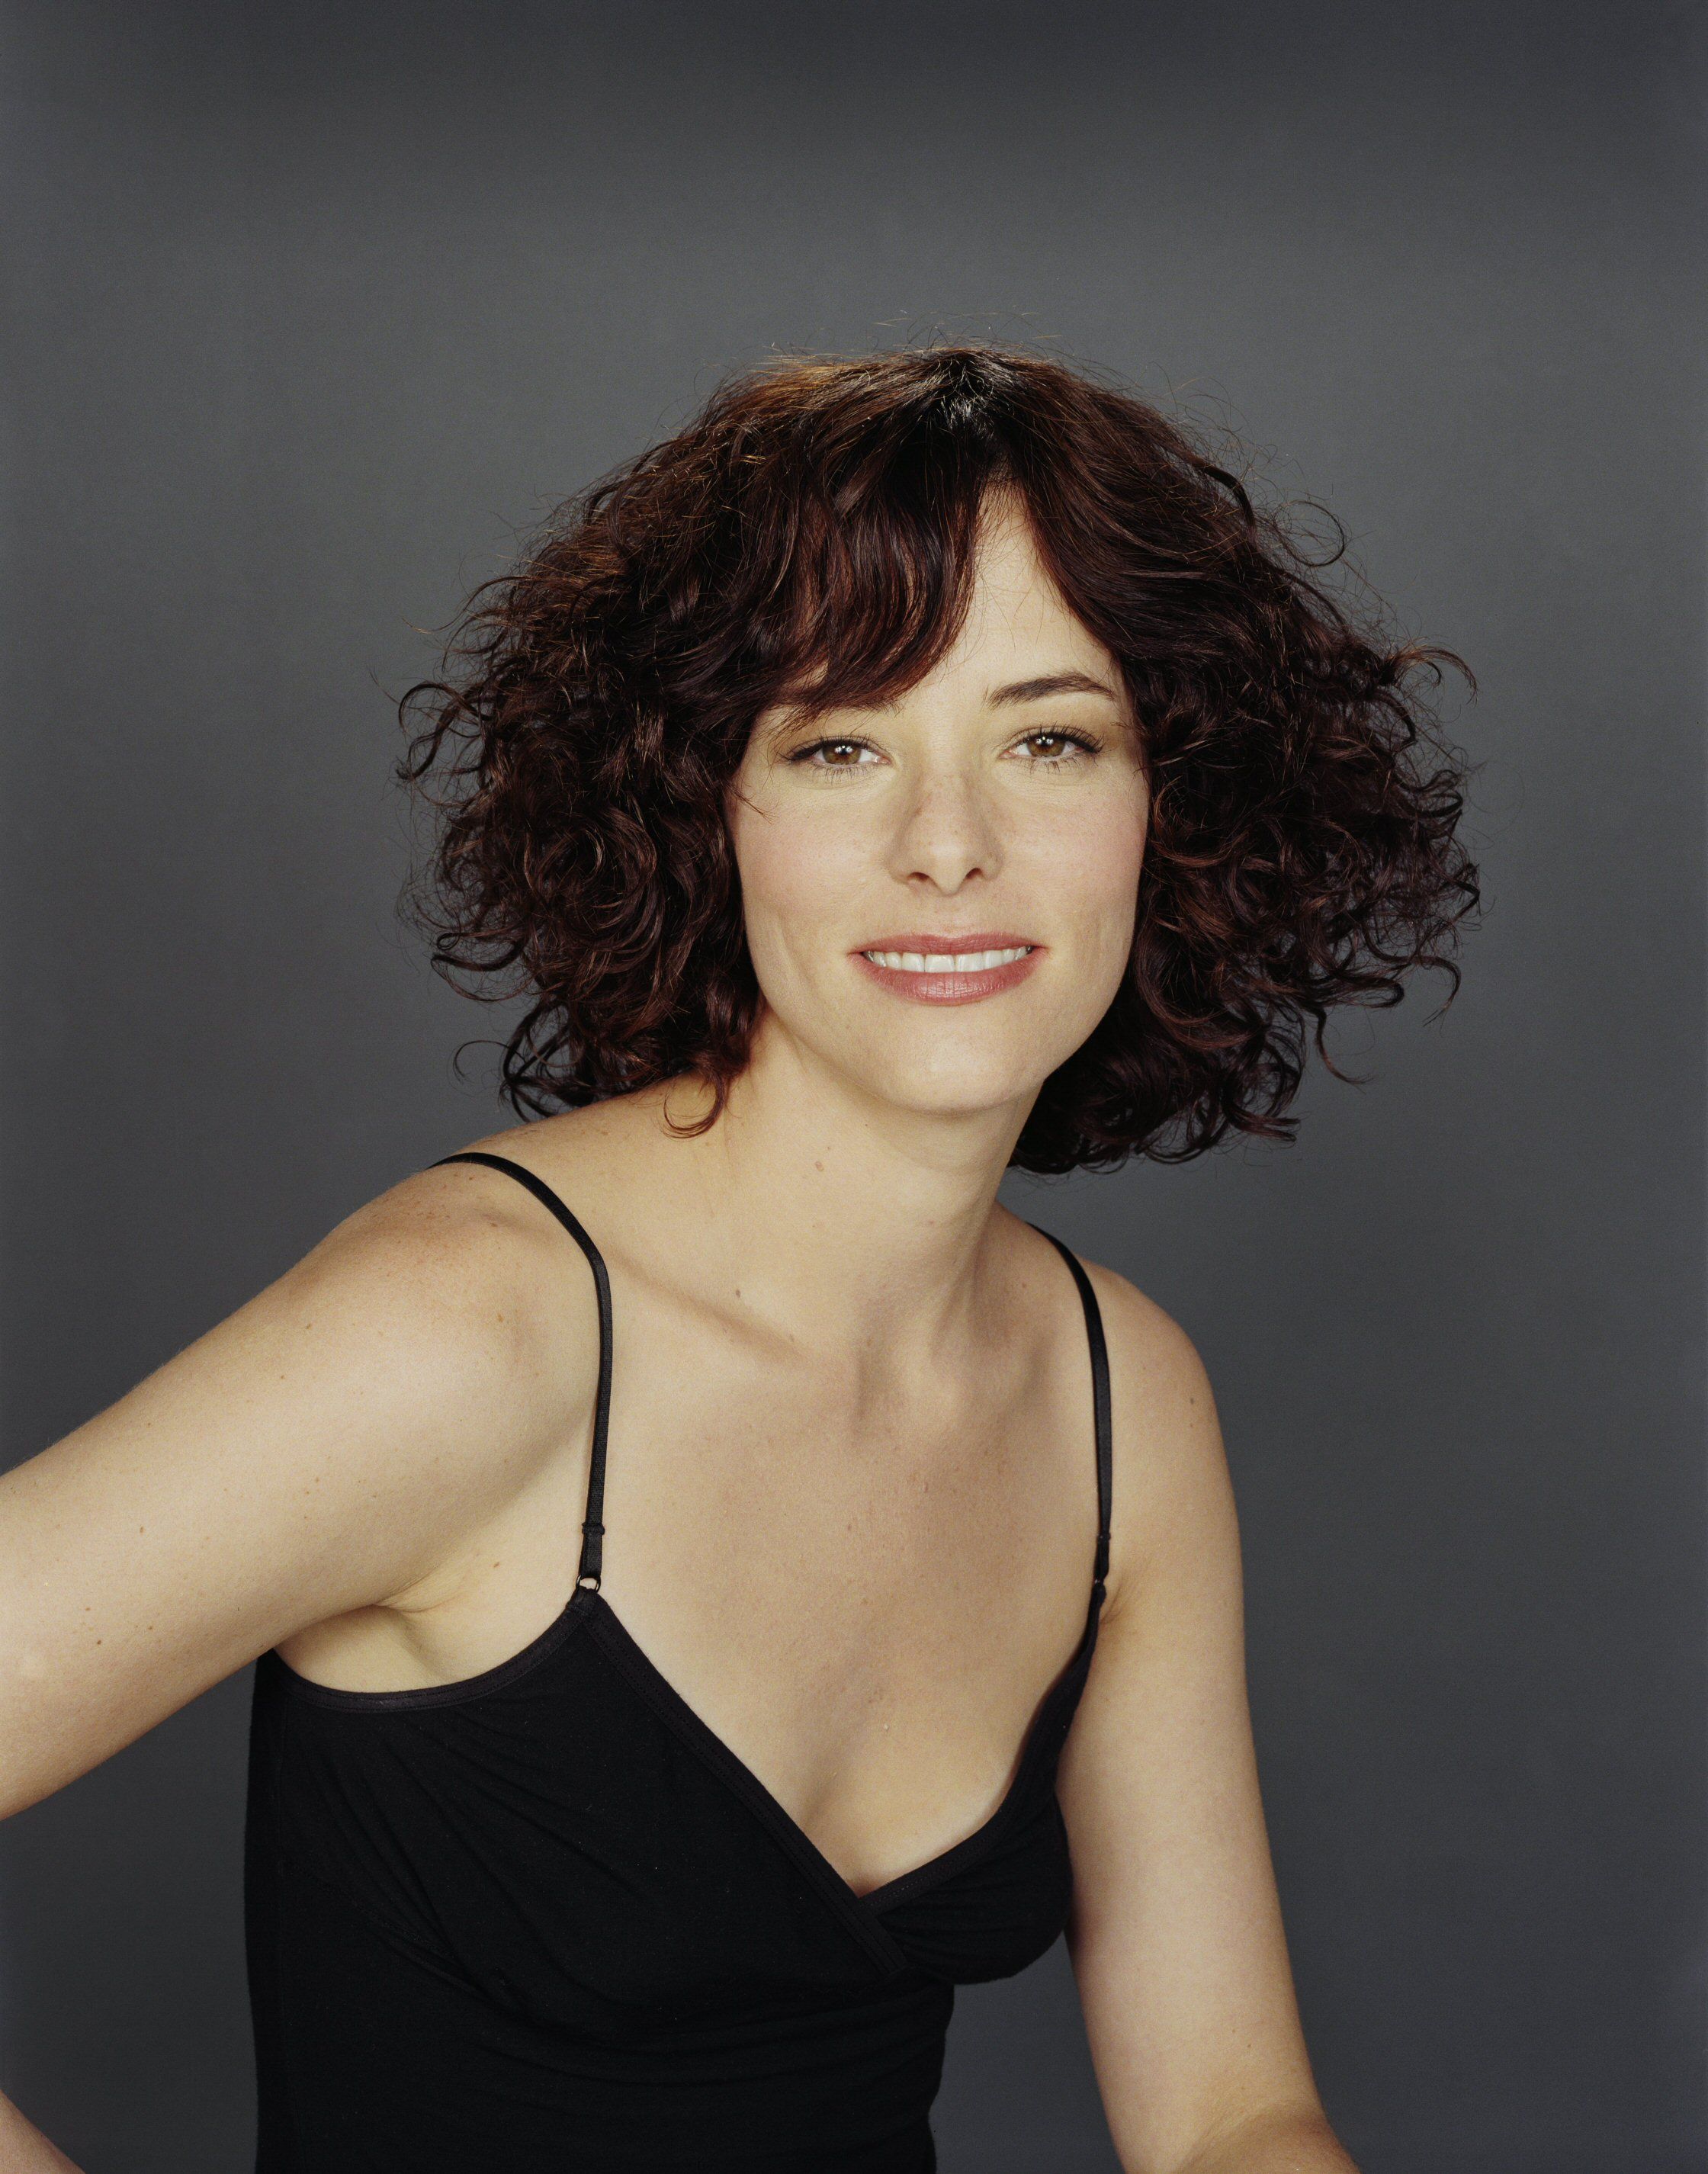 Parker images posey of Parker Posey